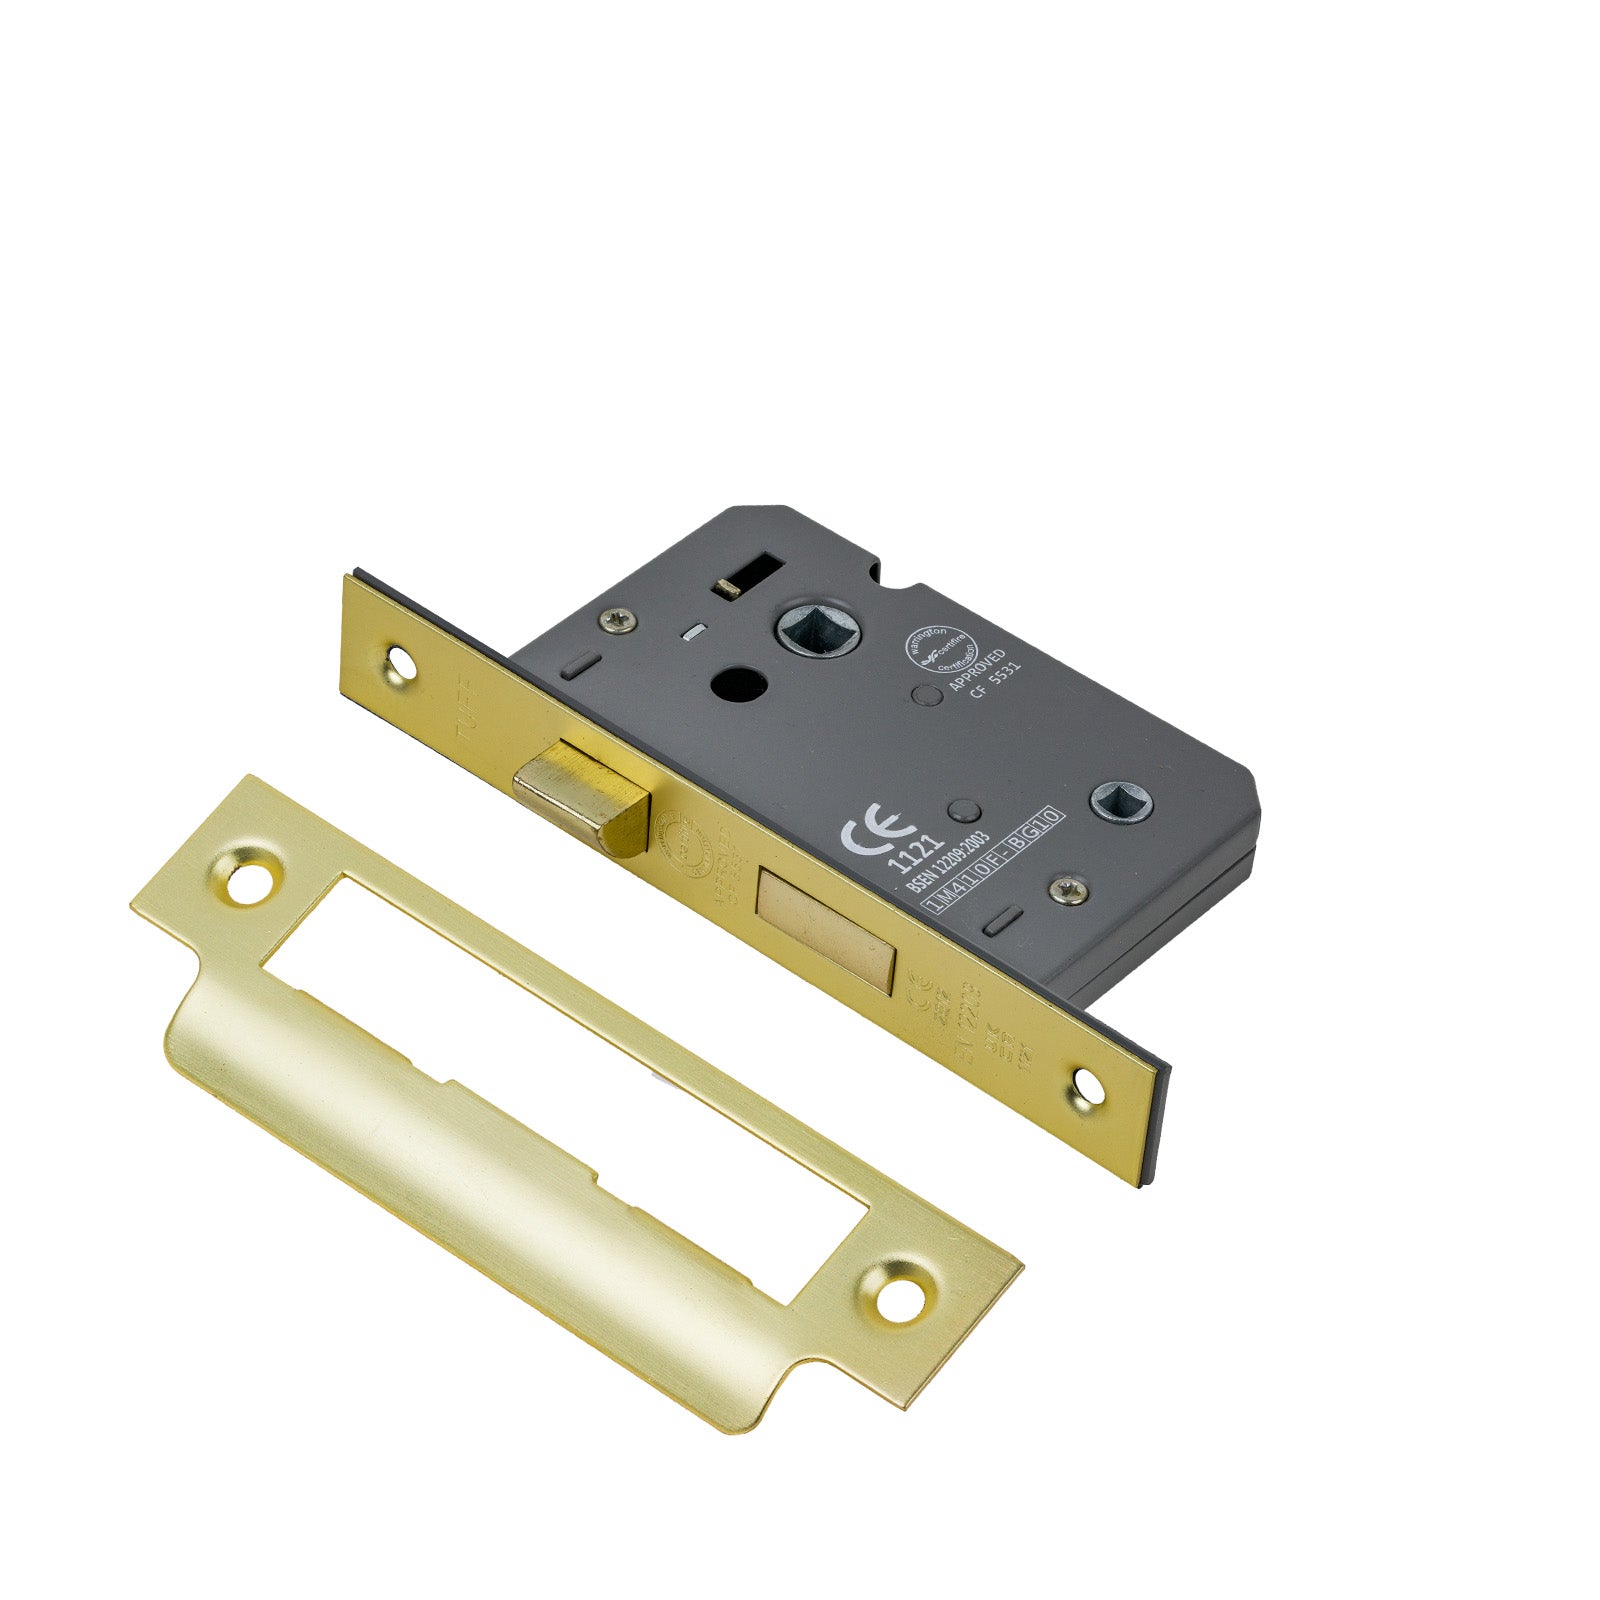 SHOW Bathroom Sash Lock - 2.5 Inch with Satin Brass finished forend and striker plate